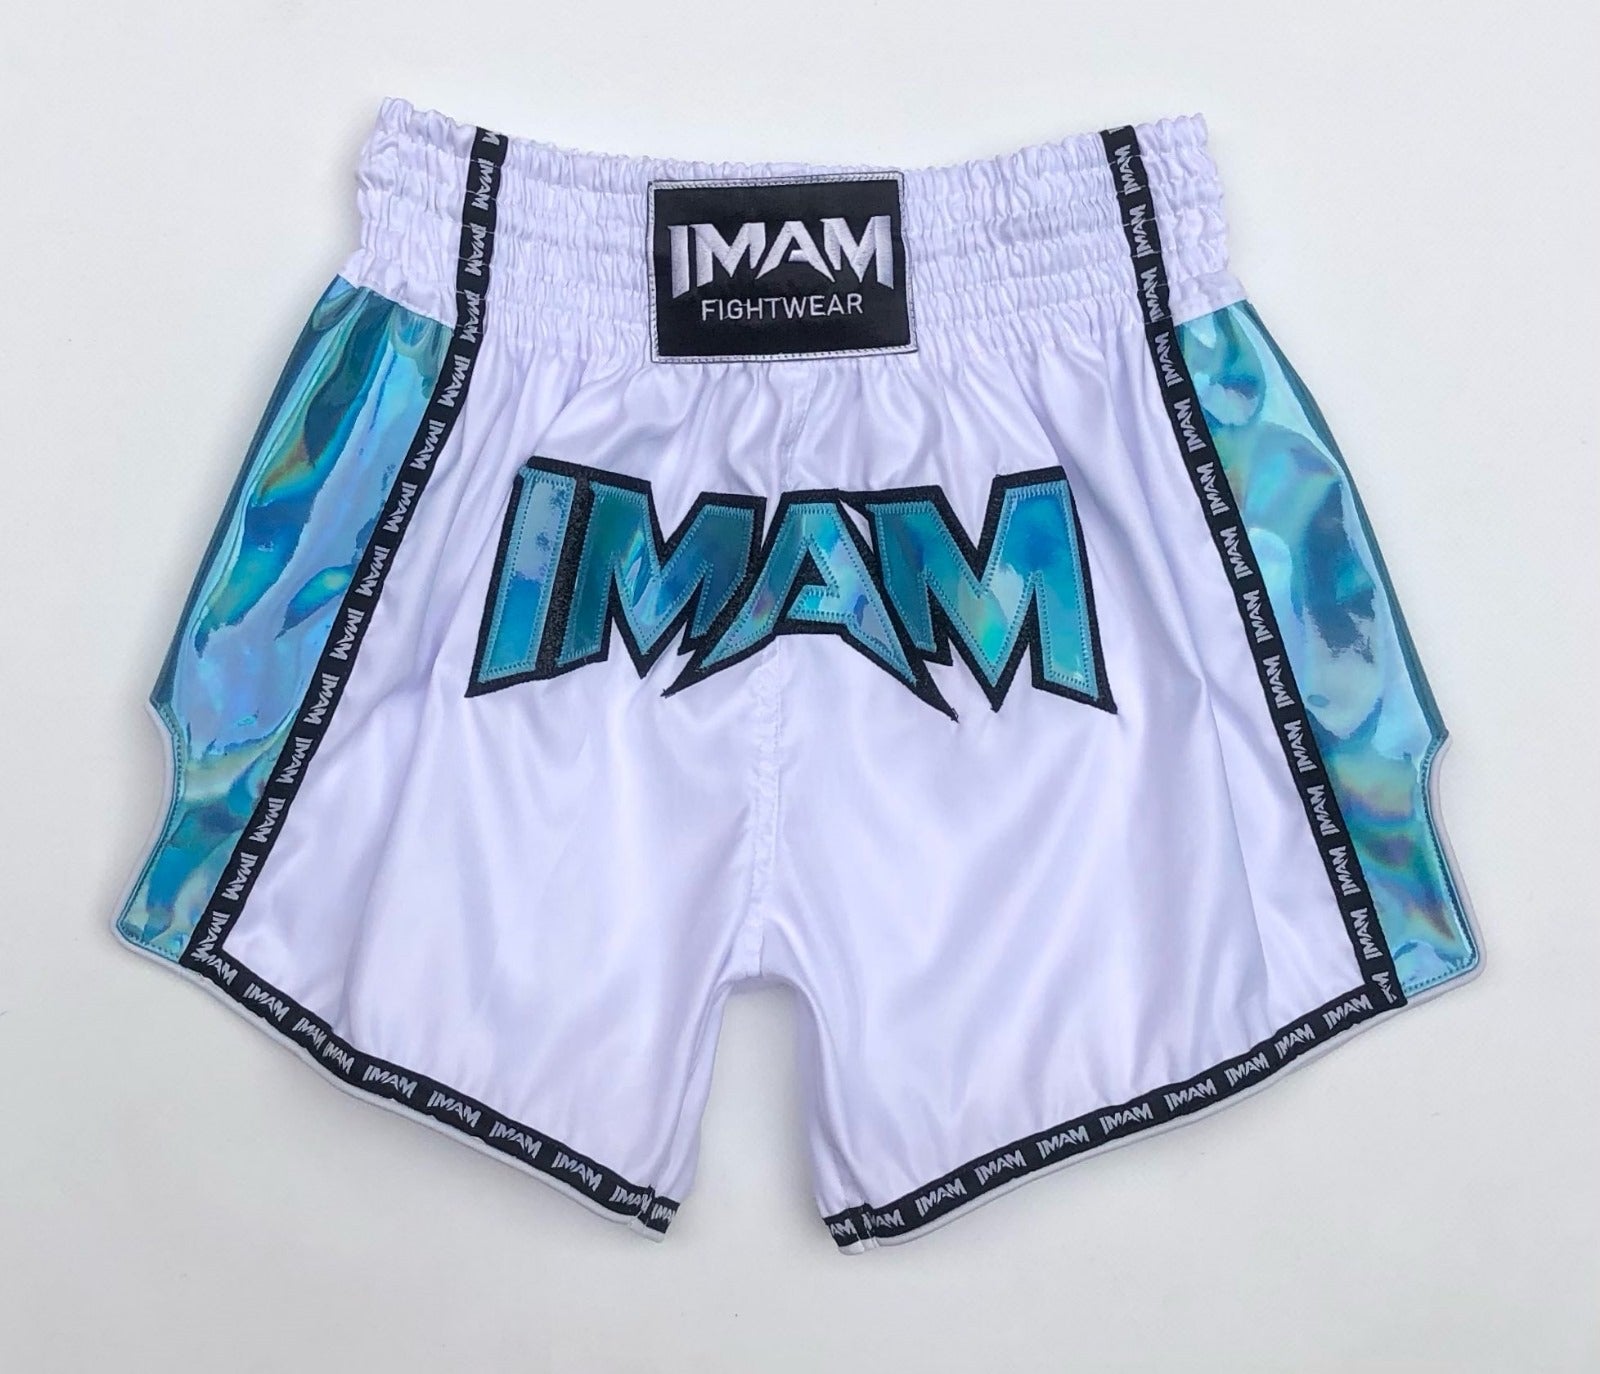 Muay Thai Boxing Shorts Blue White, affordable and direct from Thailand